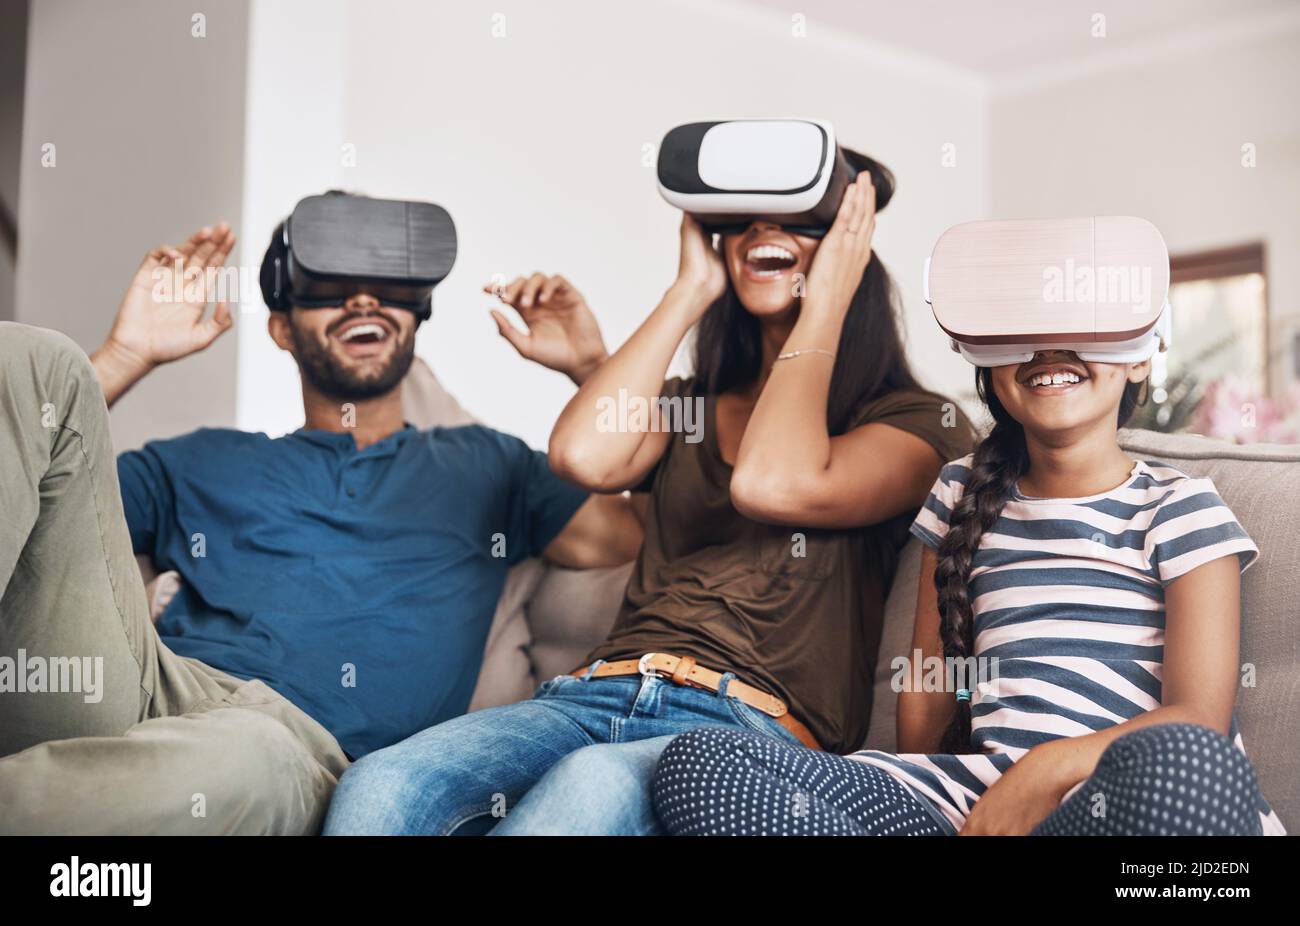 The future of family entertainment is here. Shot of a young family using virtual reality headsets together at home. Stock Photo